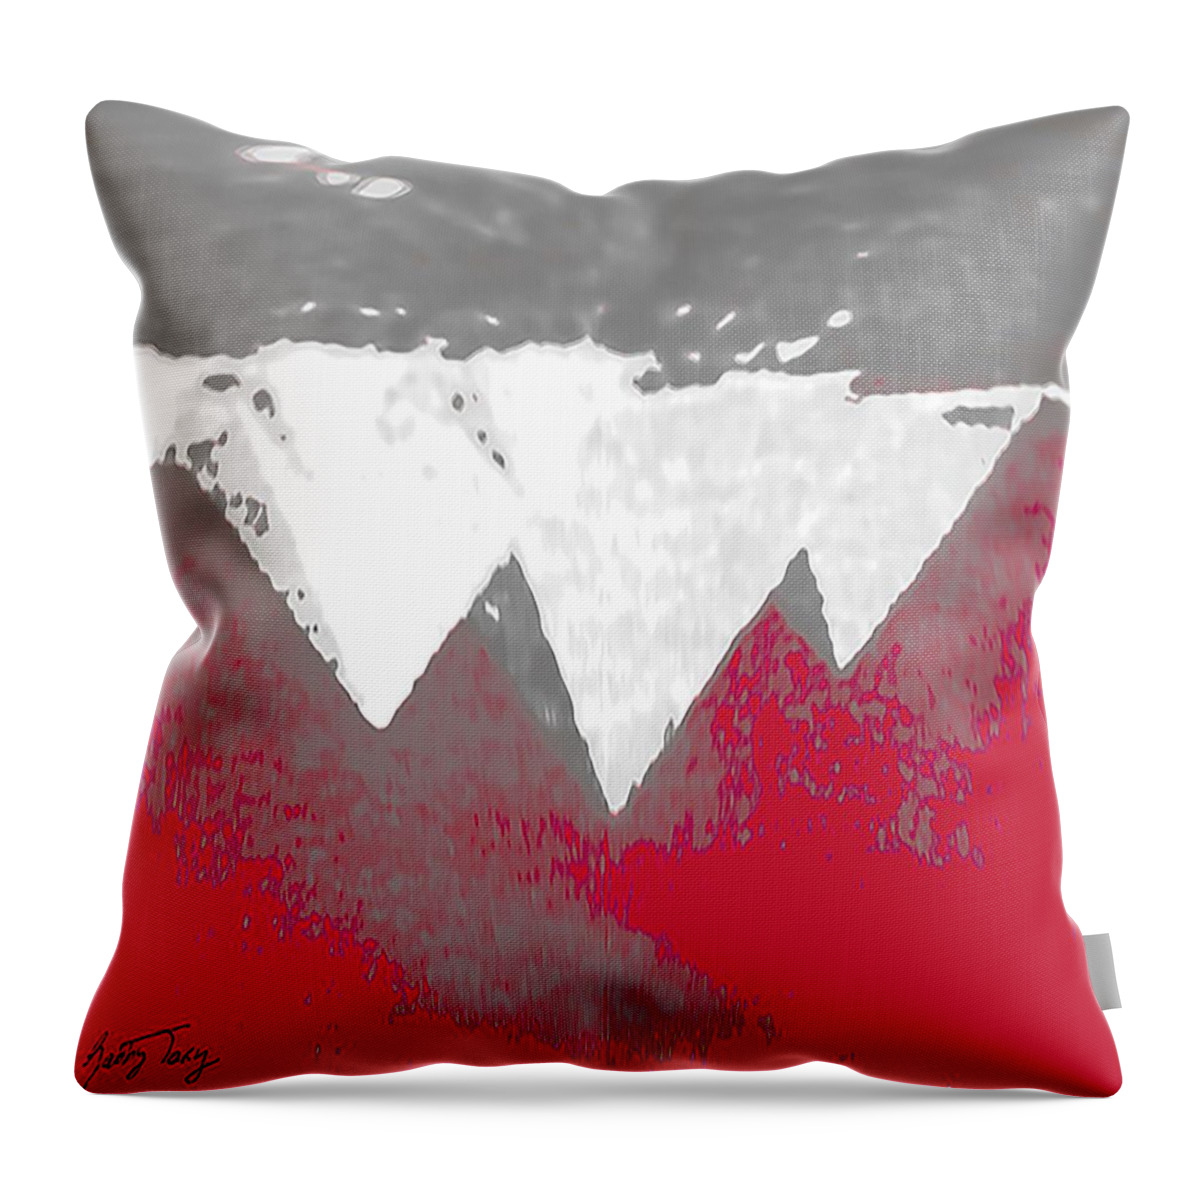 Upside Throw Pillow featuring the digital art Upside Down by Gabby Tary